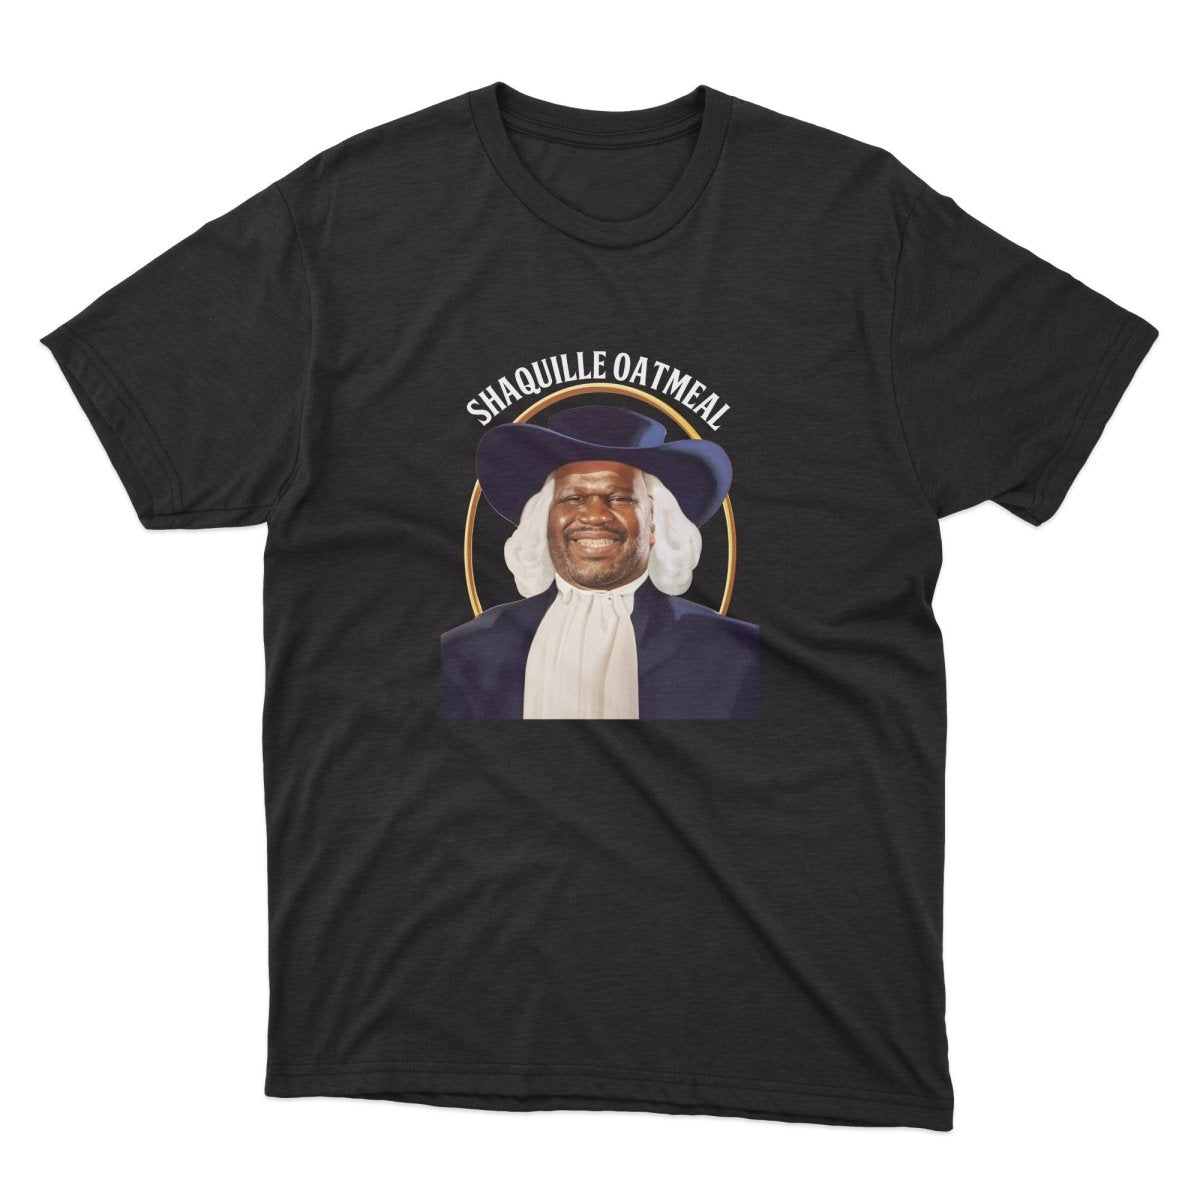 Shaquille Oatmeal Shirt - stickerbullShaquille Oatmeal ShirtShirtsPrintifystickerbull27490604716616790083BlackSa black t - shirt with a picture of a man wearing a hat and a